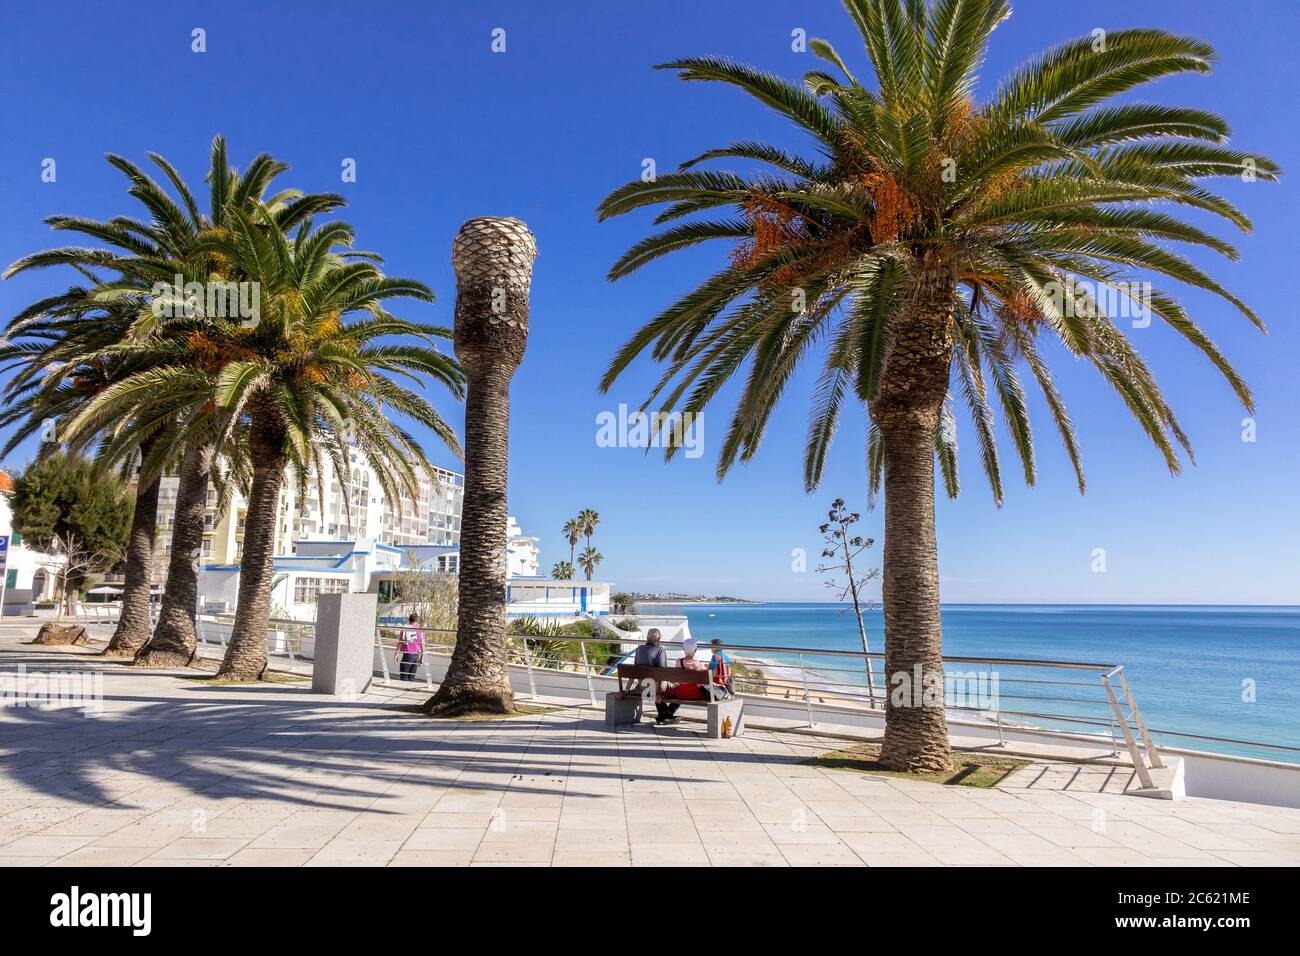 Palm Trees Tourists Sit On A Bench Looking At The Sea In Armacao de Pera On The Sea Front The Algarve Portugal Stock Photo